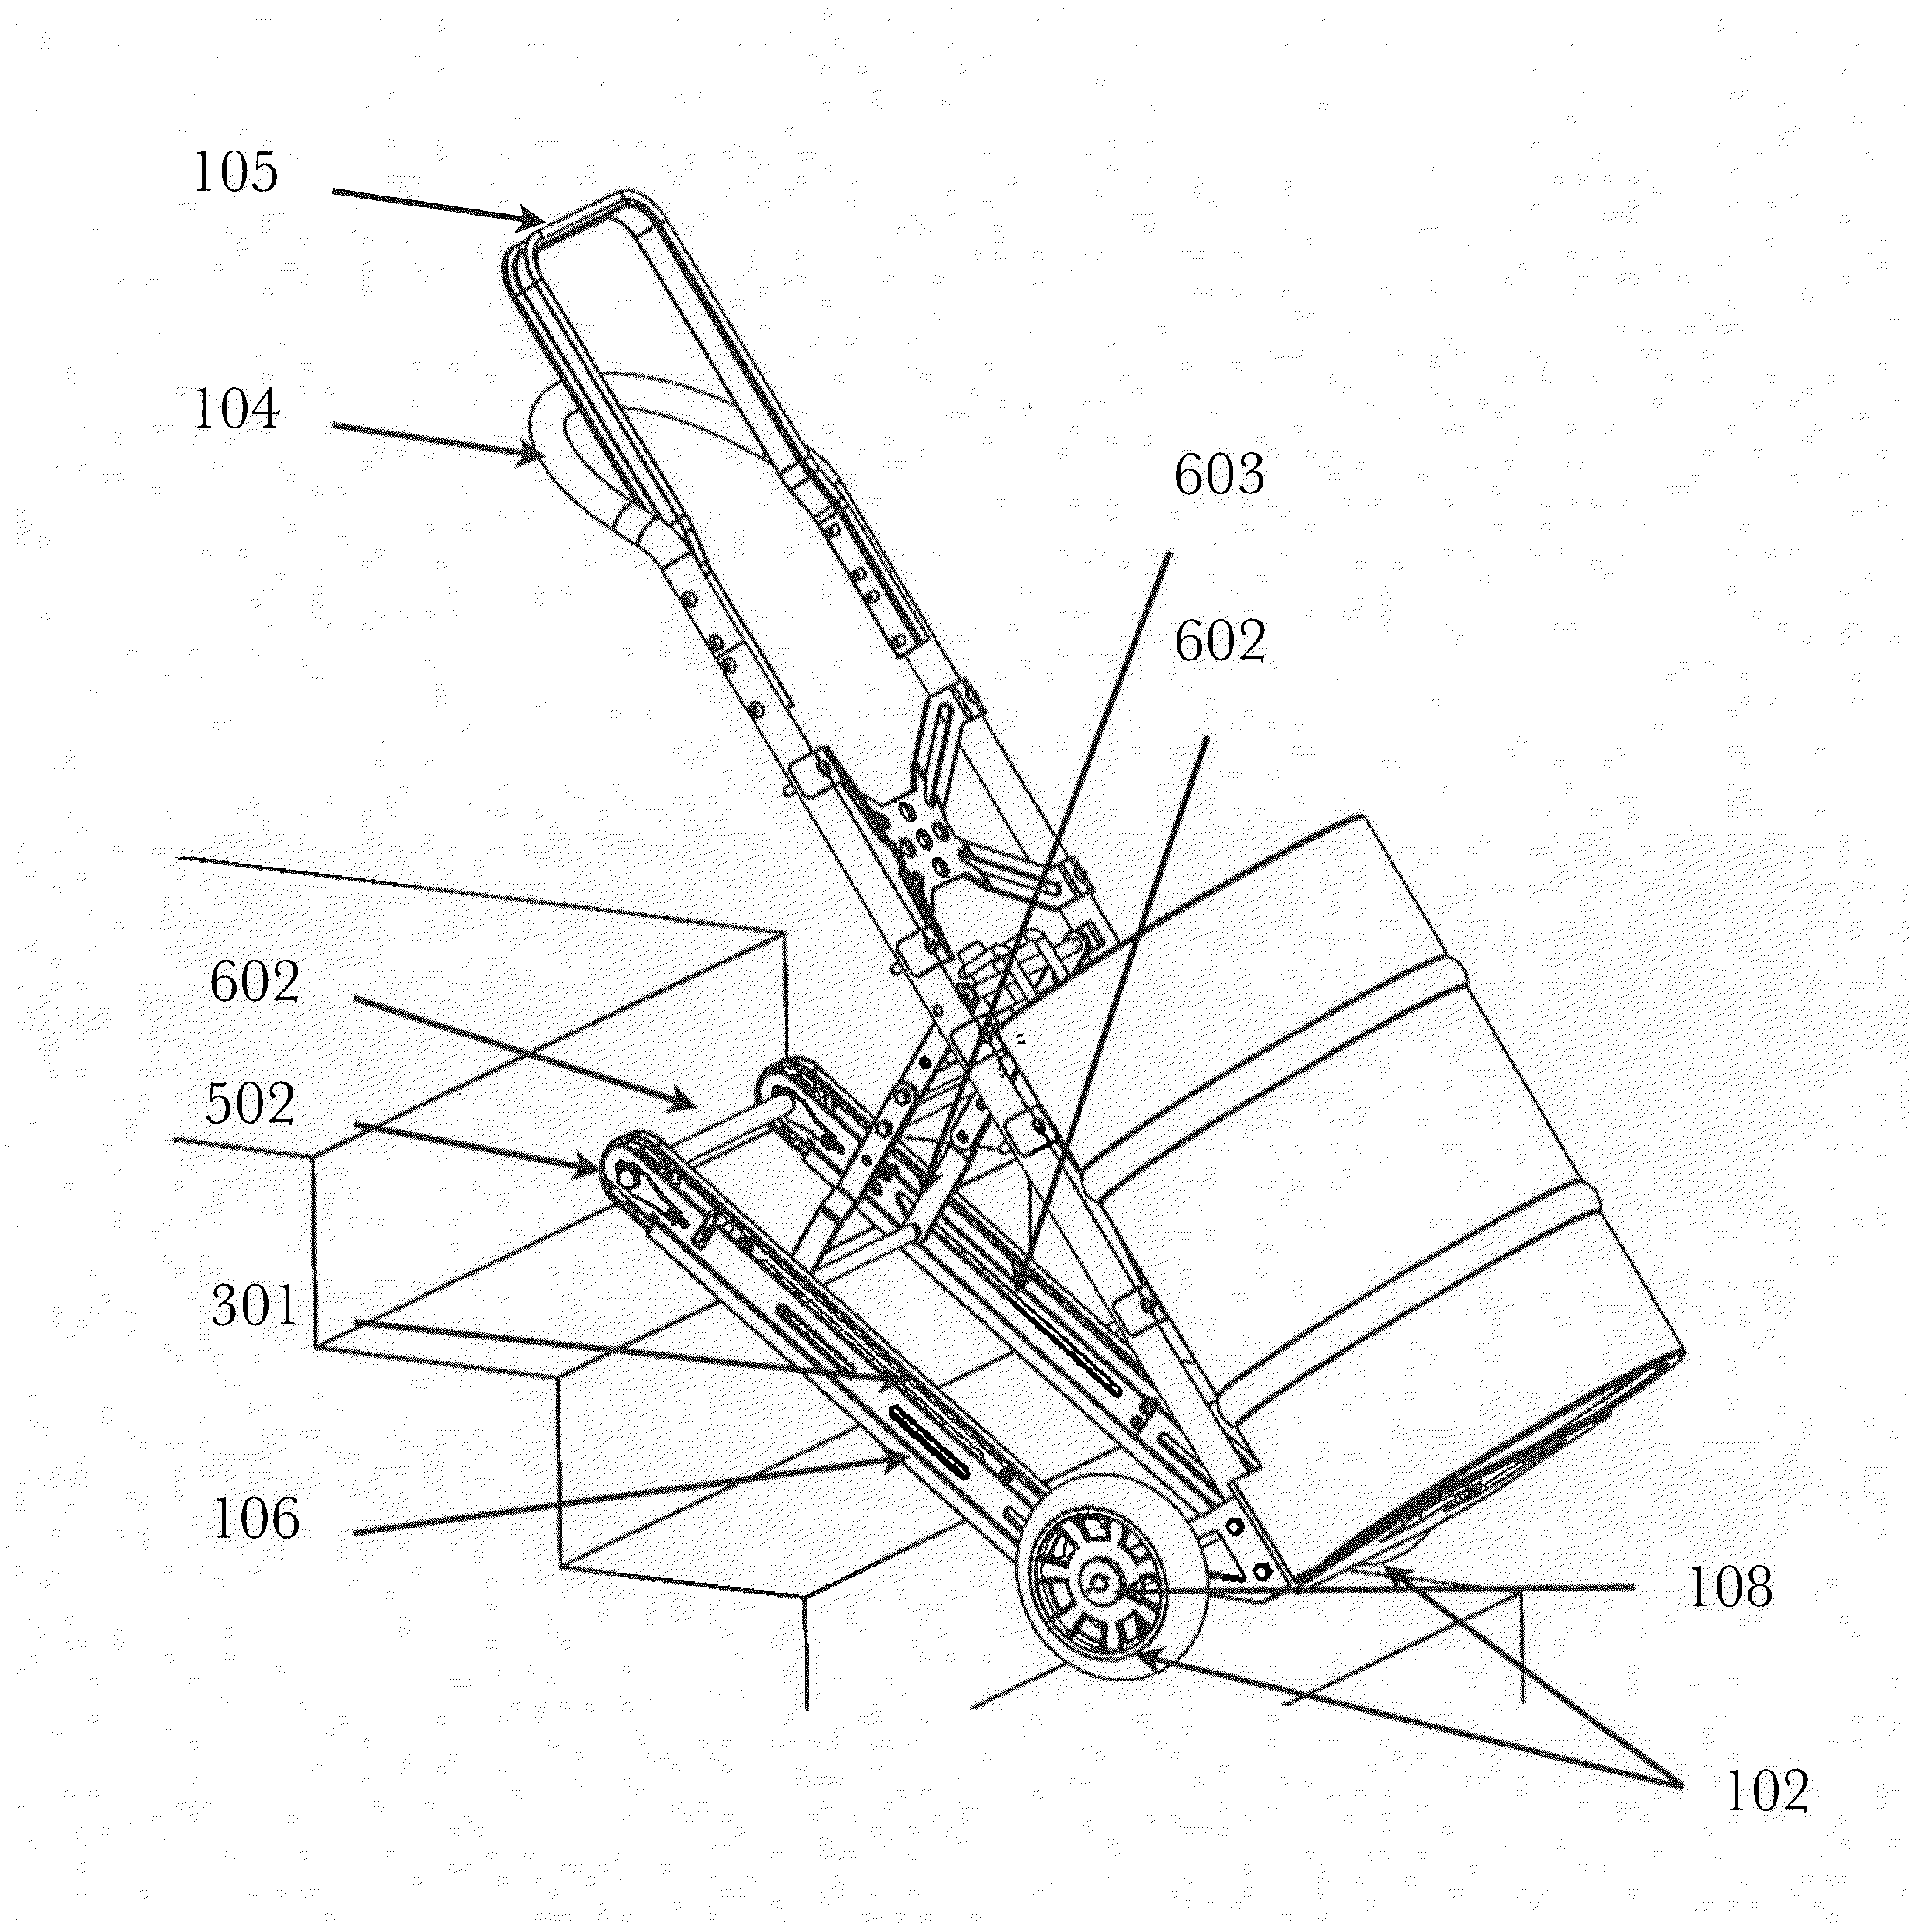 Stair traversing delivery apparatus